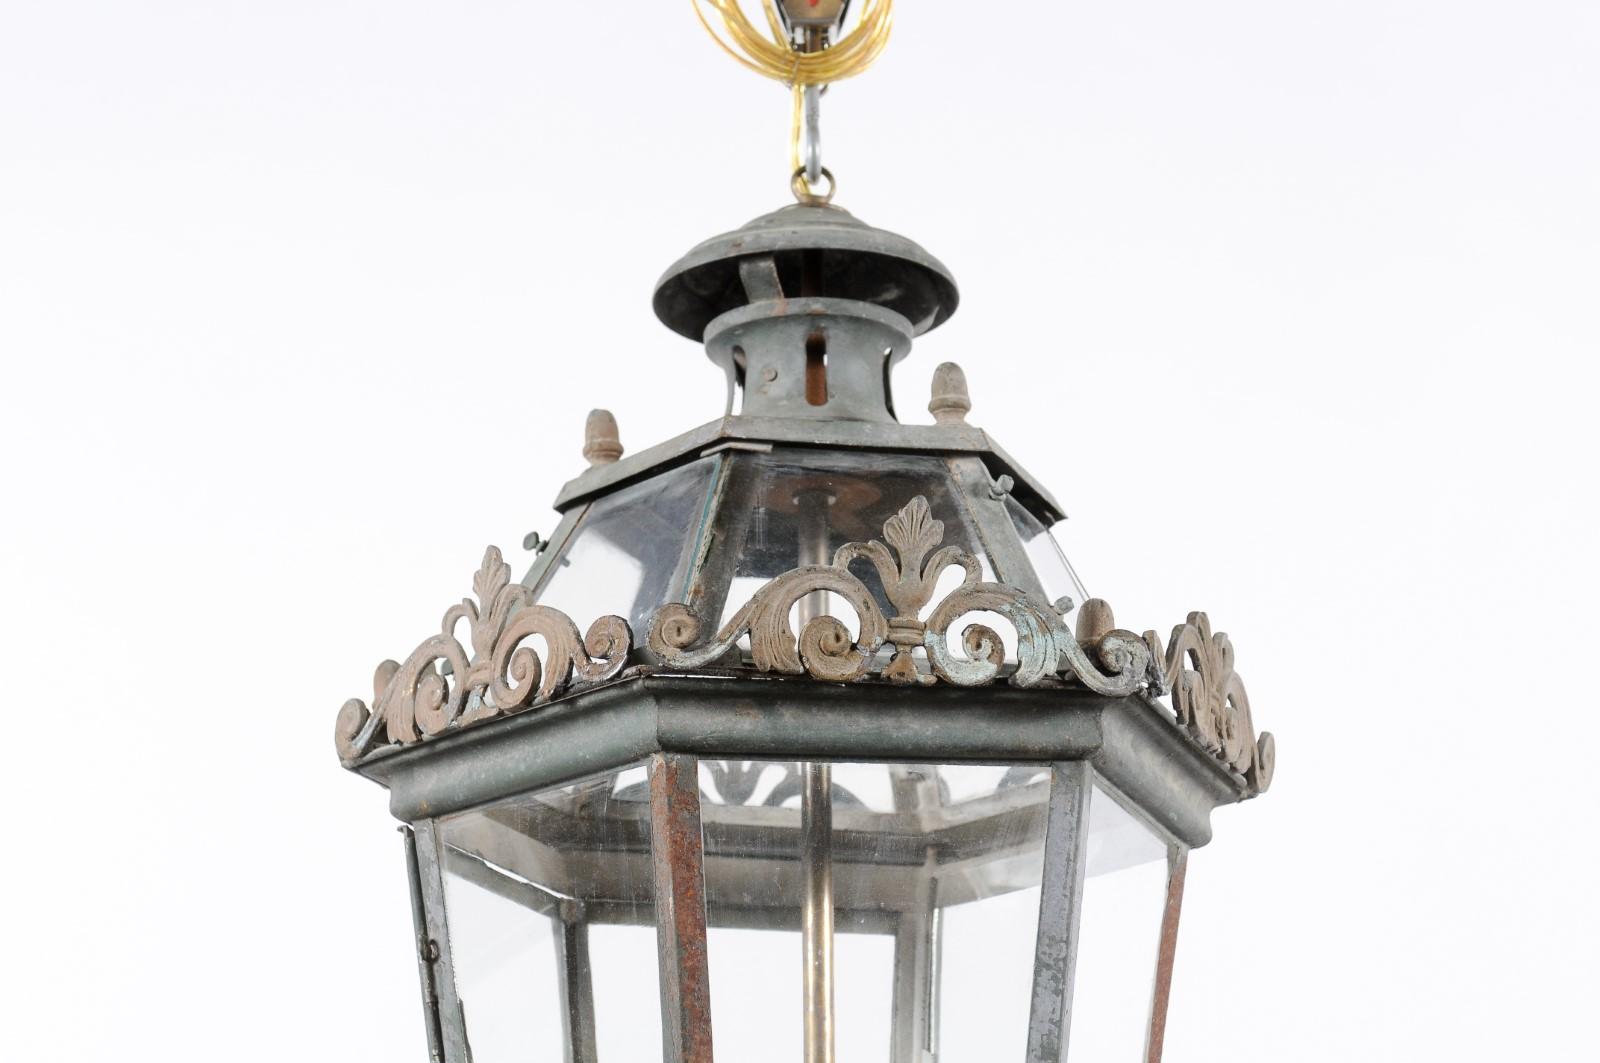  Venetian Painted Iron Street Lantern with 3 Lights, Late 19th Century For Sale 2